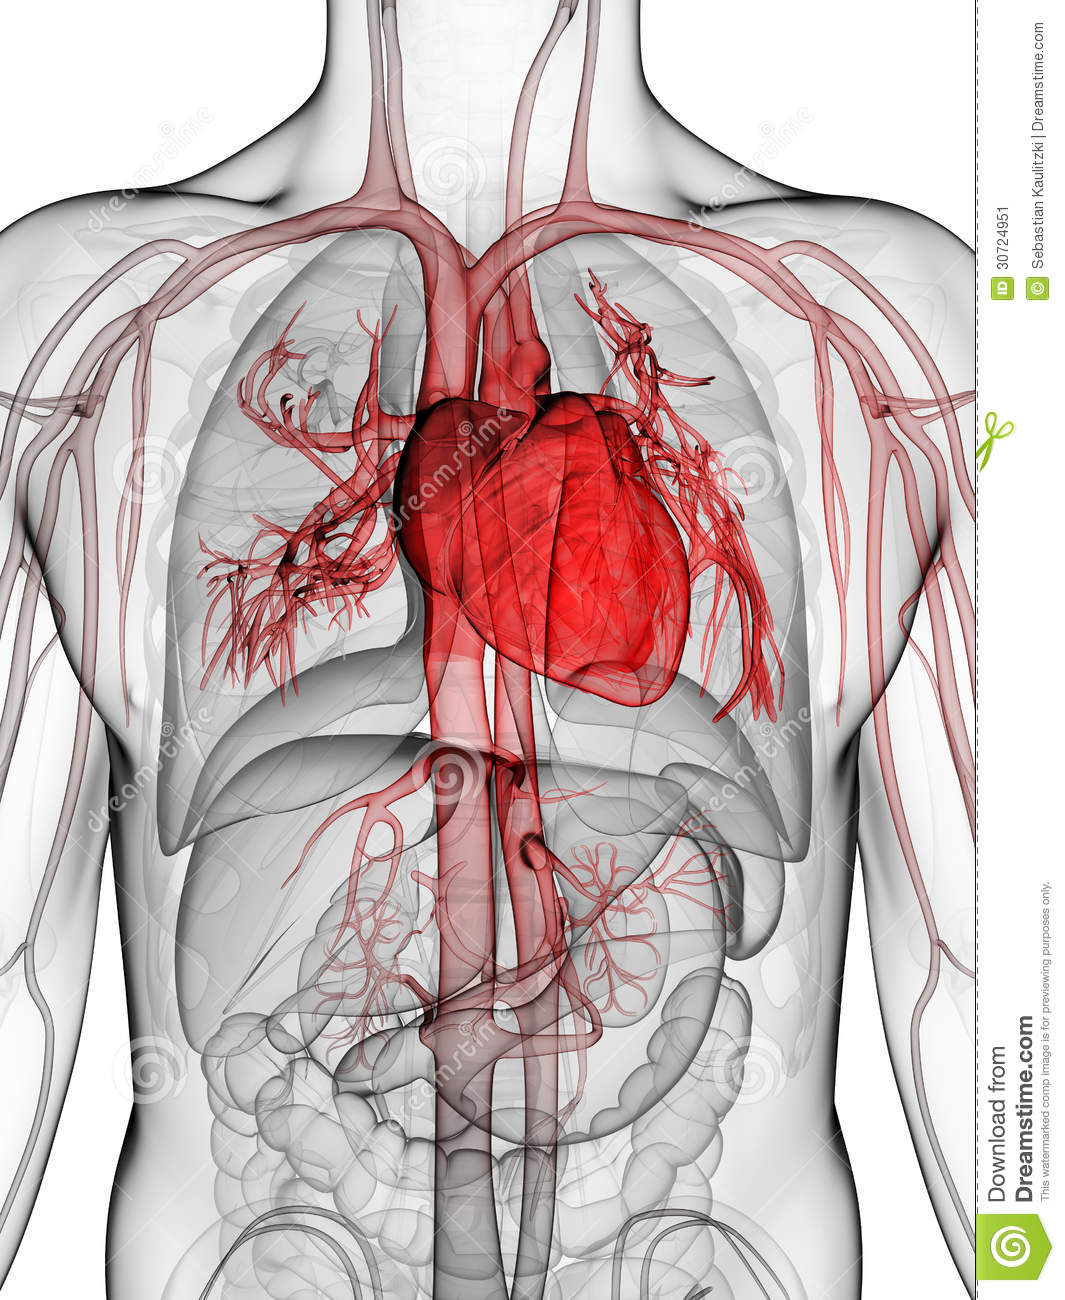 3d Rendered Illustration Of The Human Heart